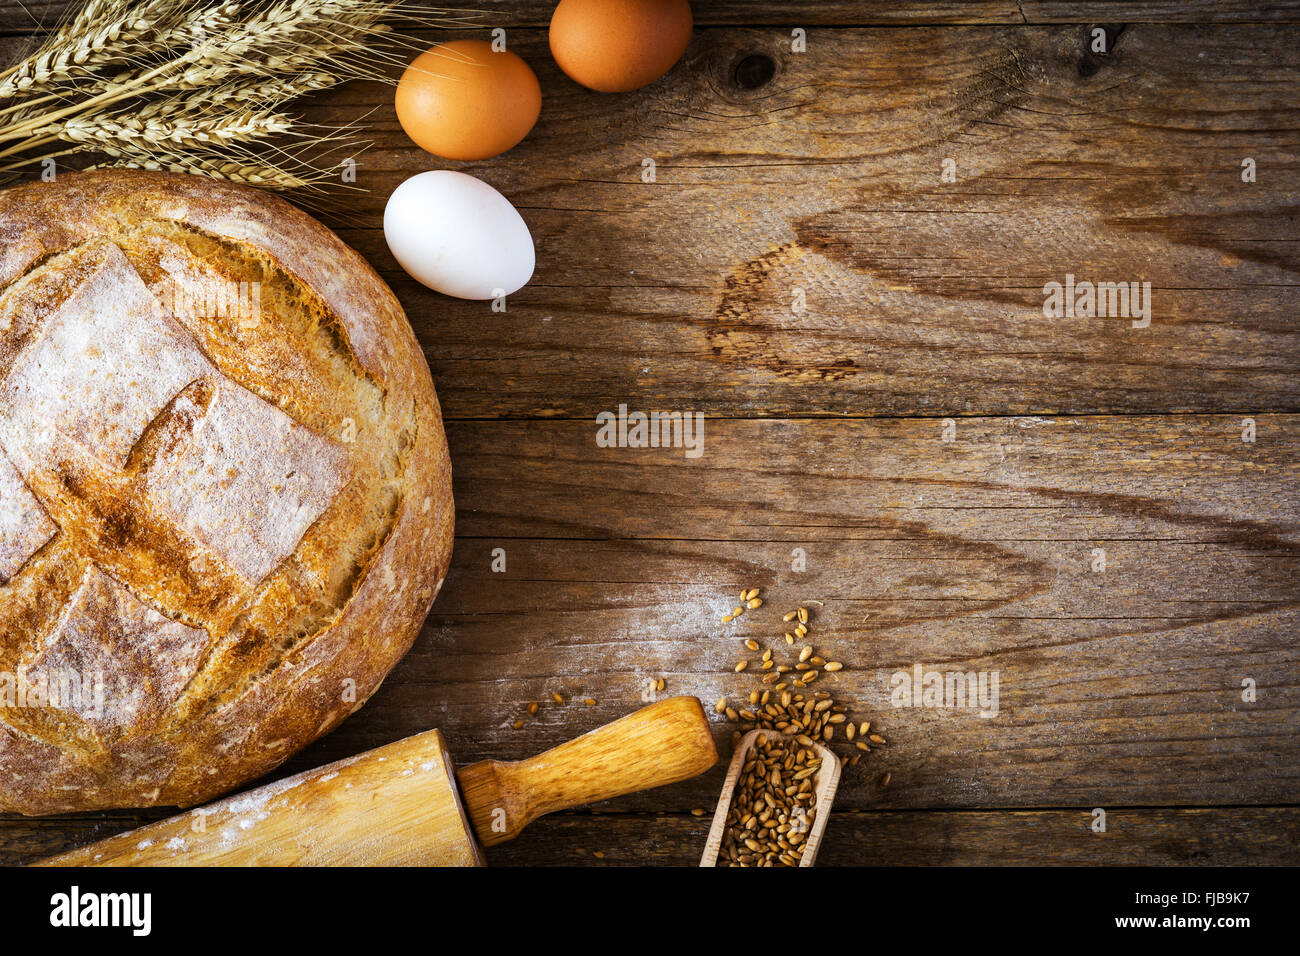 Baking bread food background: fresh round loaf of bread, fresh eggs, wheat, wheat ears and rolling-pin on wooden backdrop Stock Photo